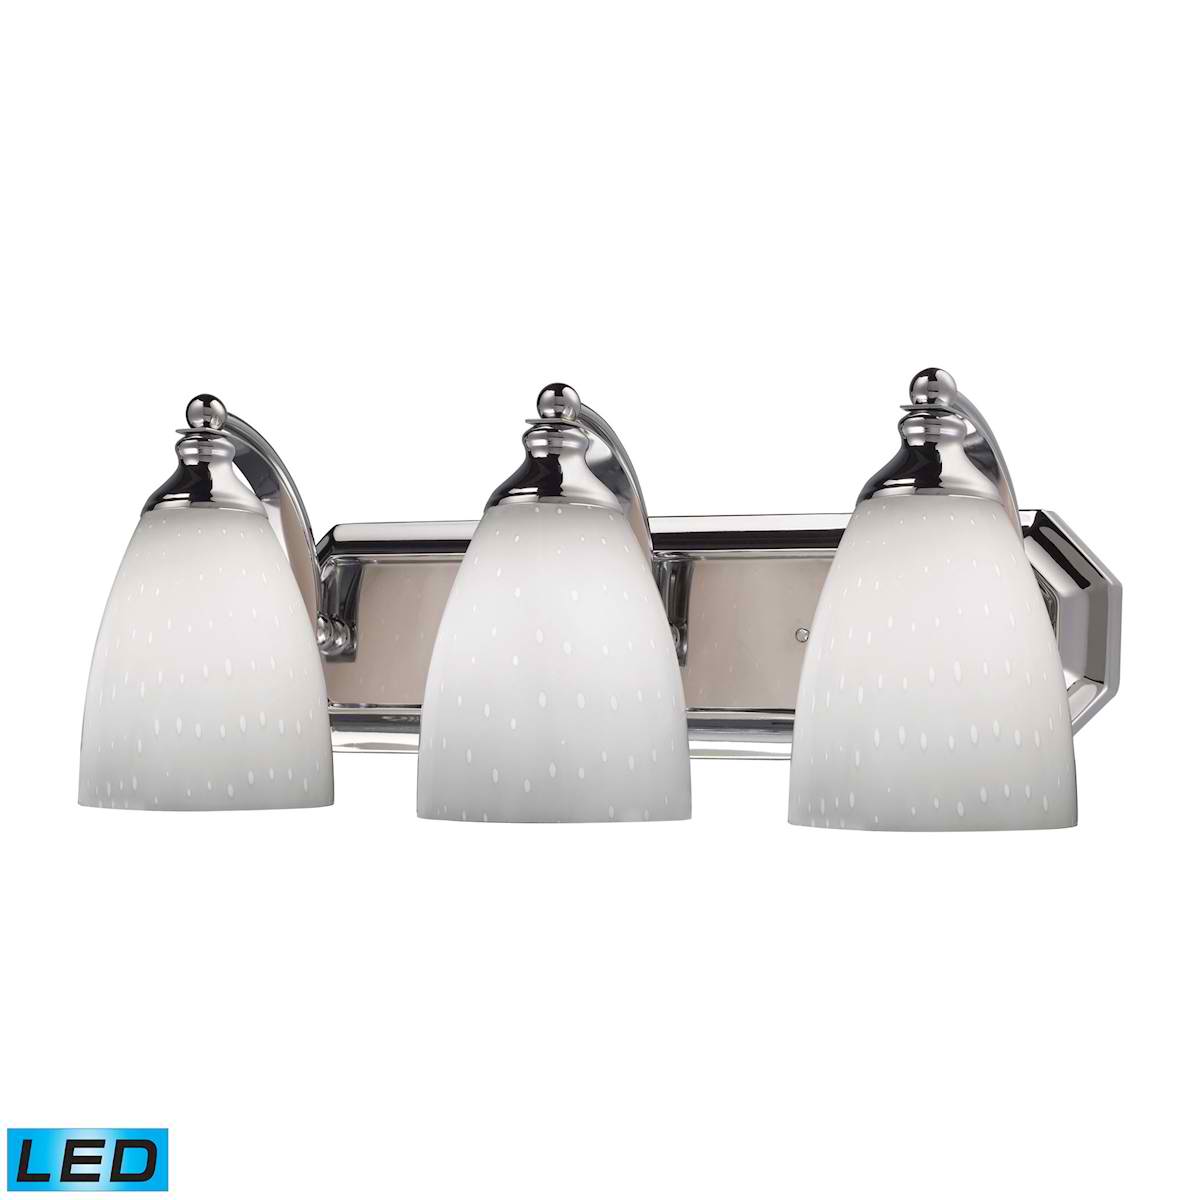 3 Light Vanity in Polished Chrome and Simply White Glass - LED, 800 Lumens (2400 Lumens Total) With Full Scale